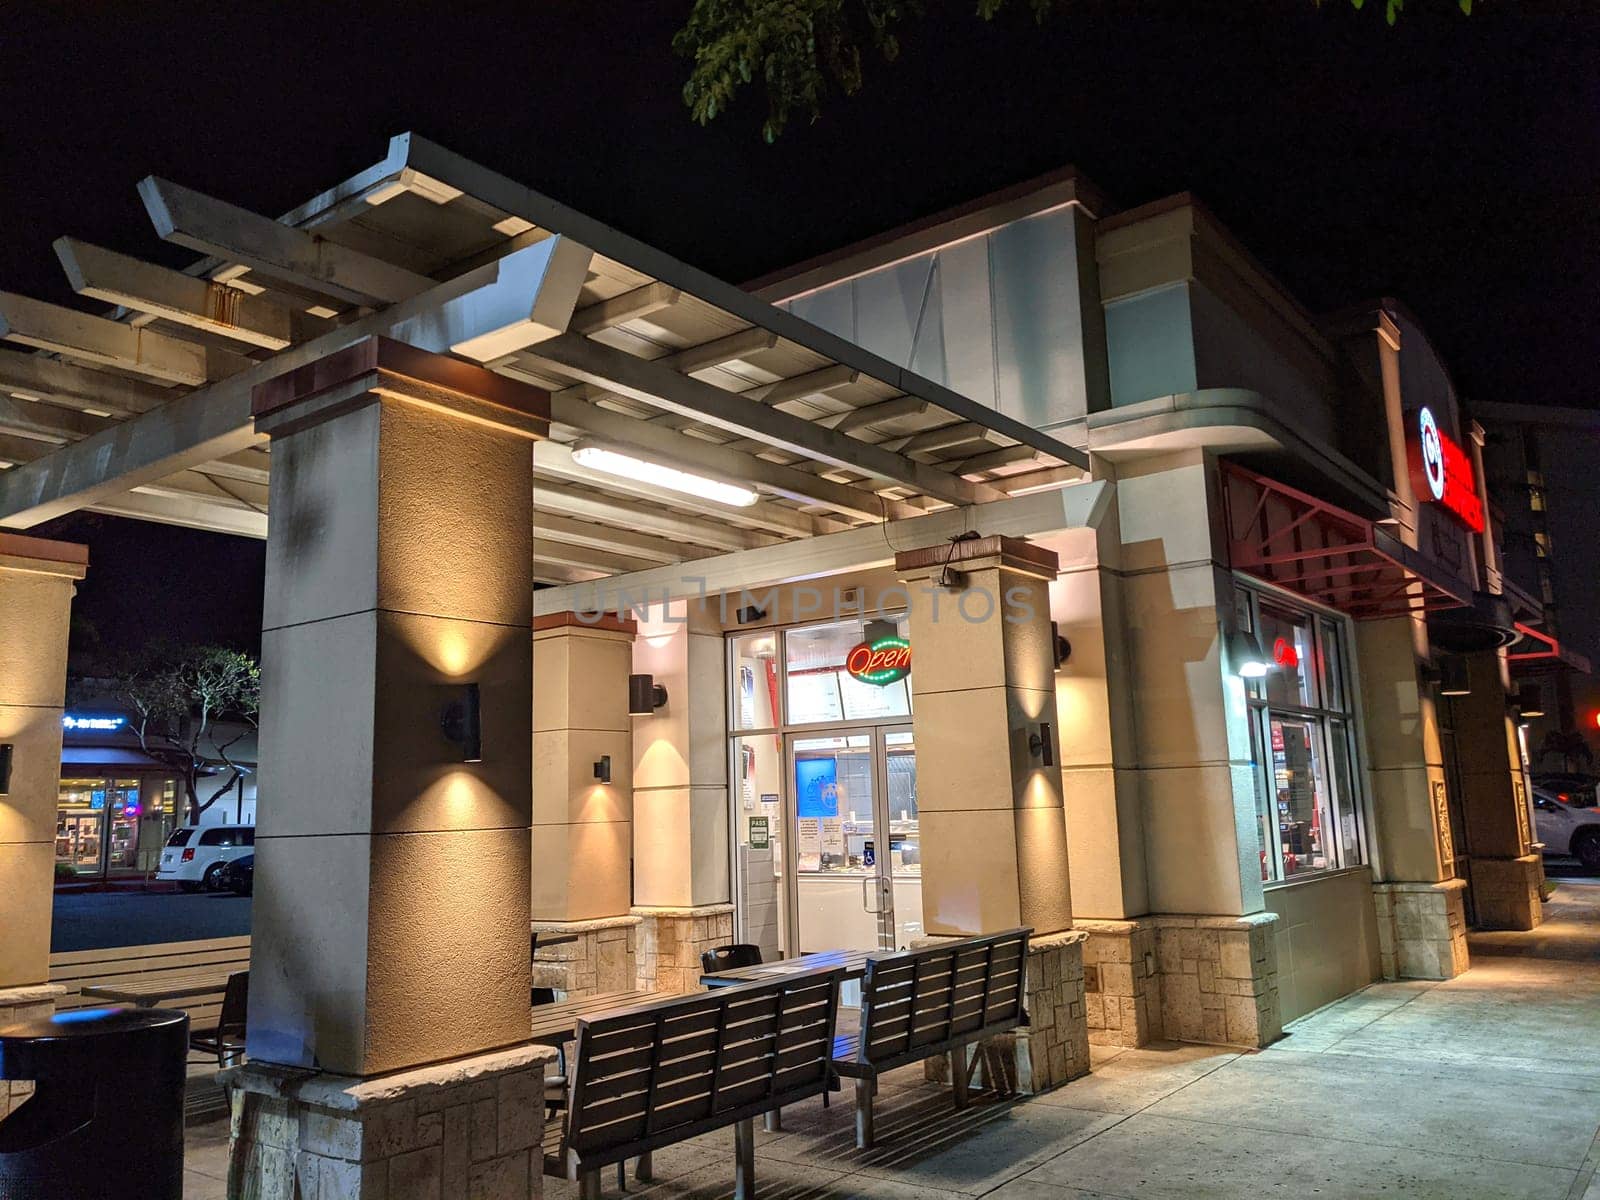 Honolulu - May 6, 2021:  Exterior of a Panda Express restaurant at night. The restaurant is a beige stucco building with a red and white sign and a neon "Open" sign. The building is lit by streetlights and the neon sign. There is a bench and a trash can in front of the building.